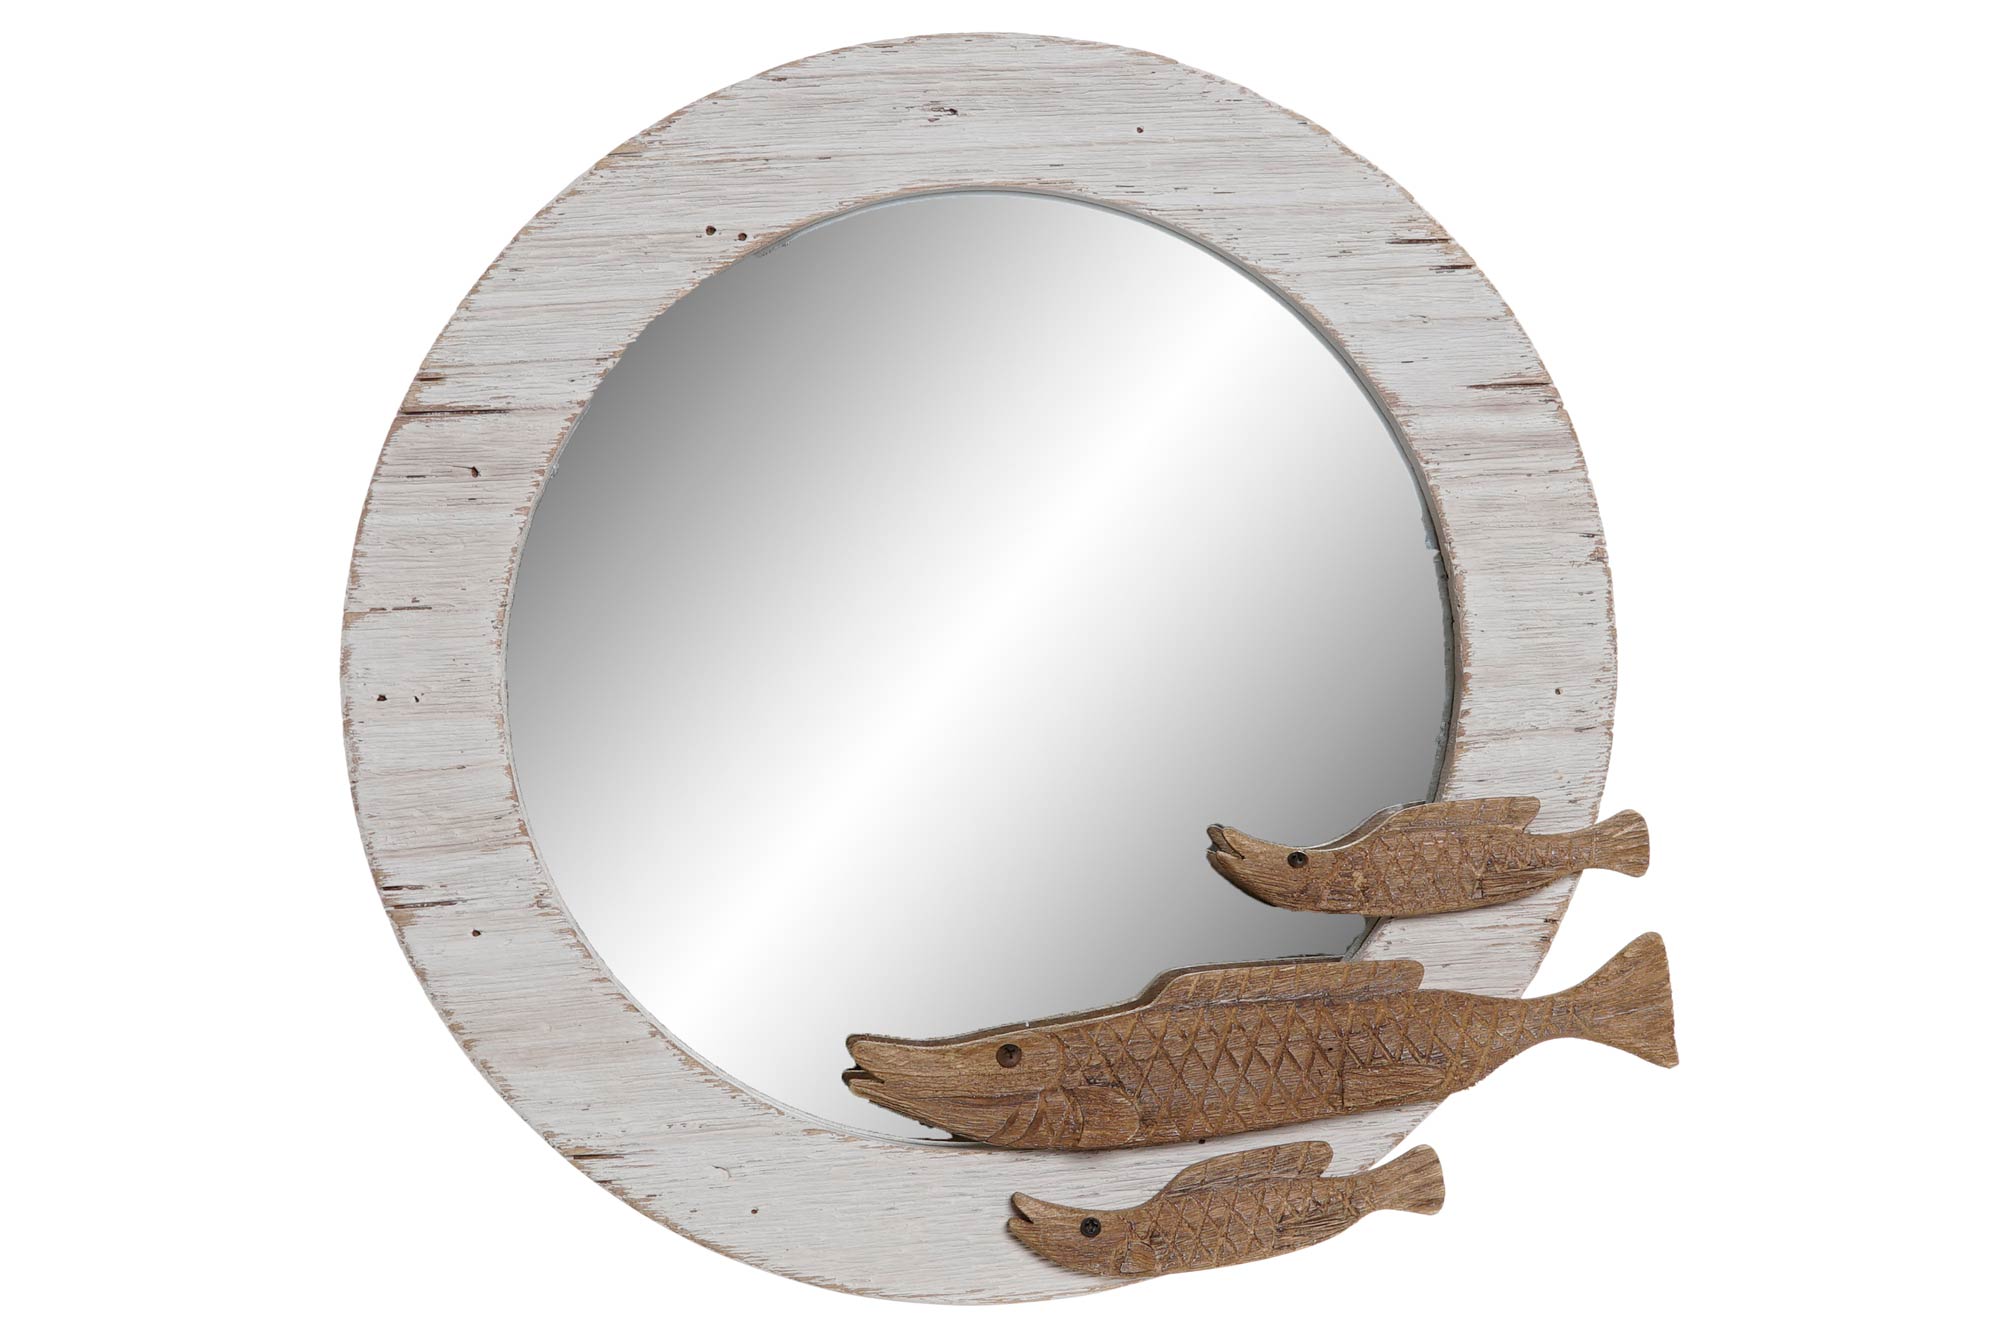 Whitewashed Round Mirror with Fishes